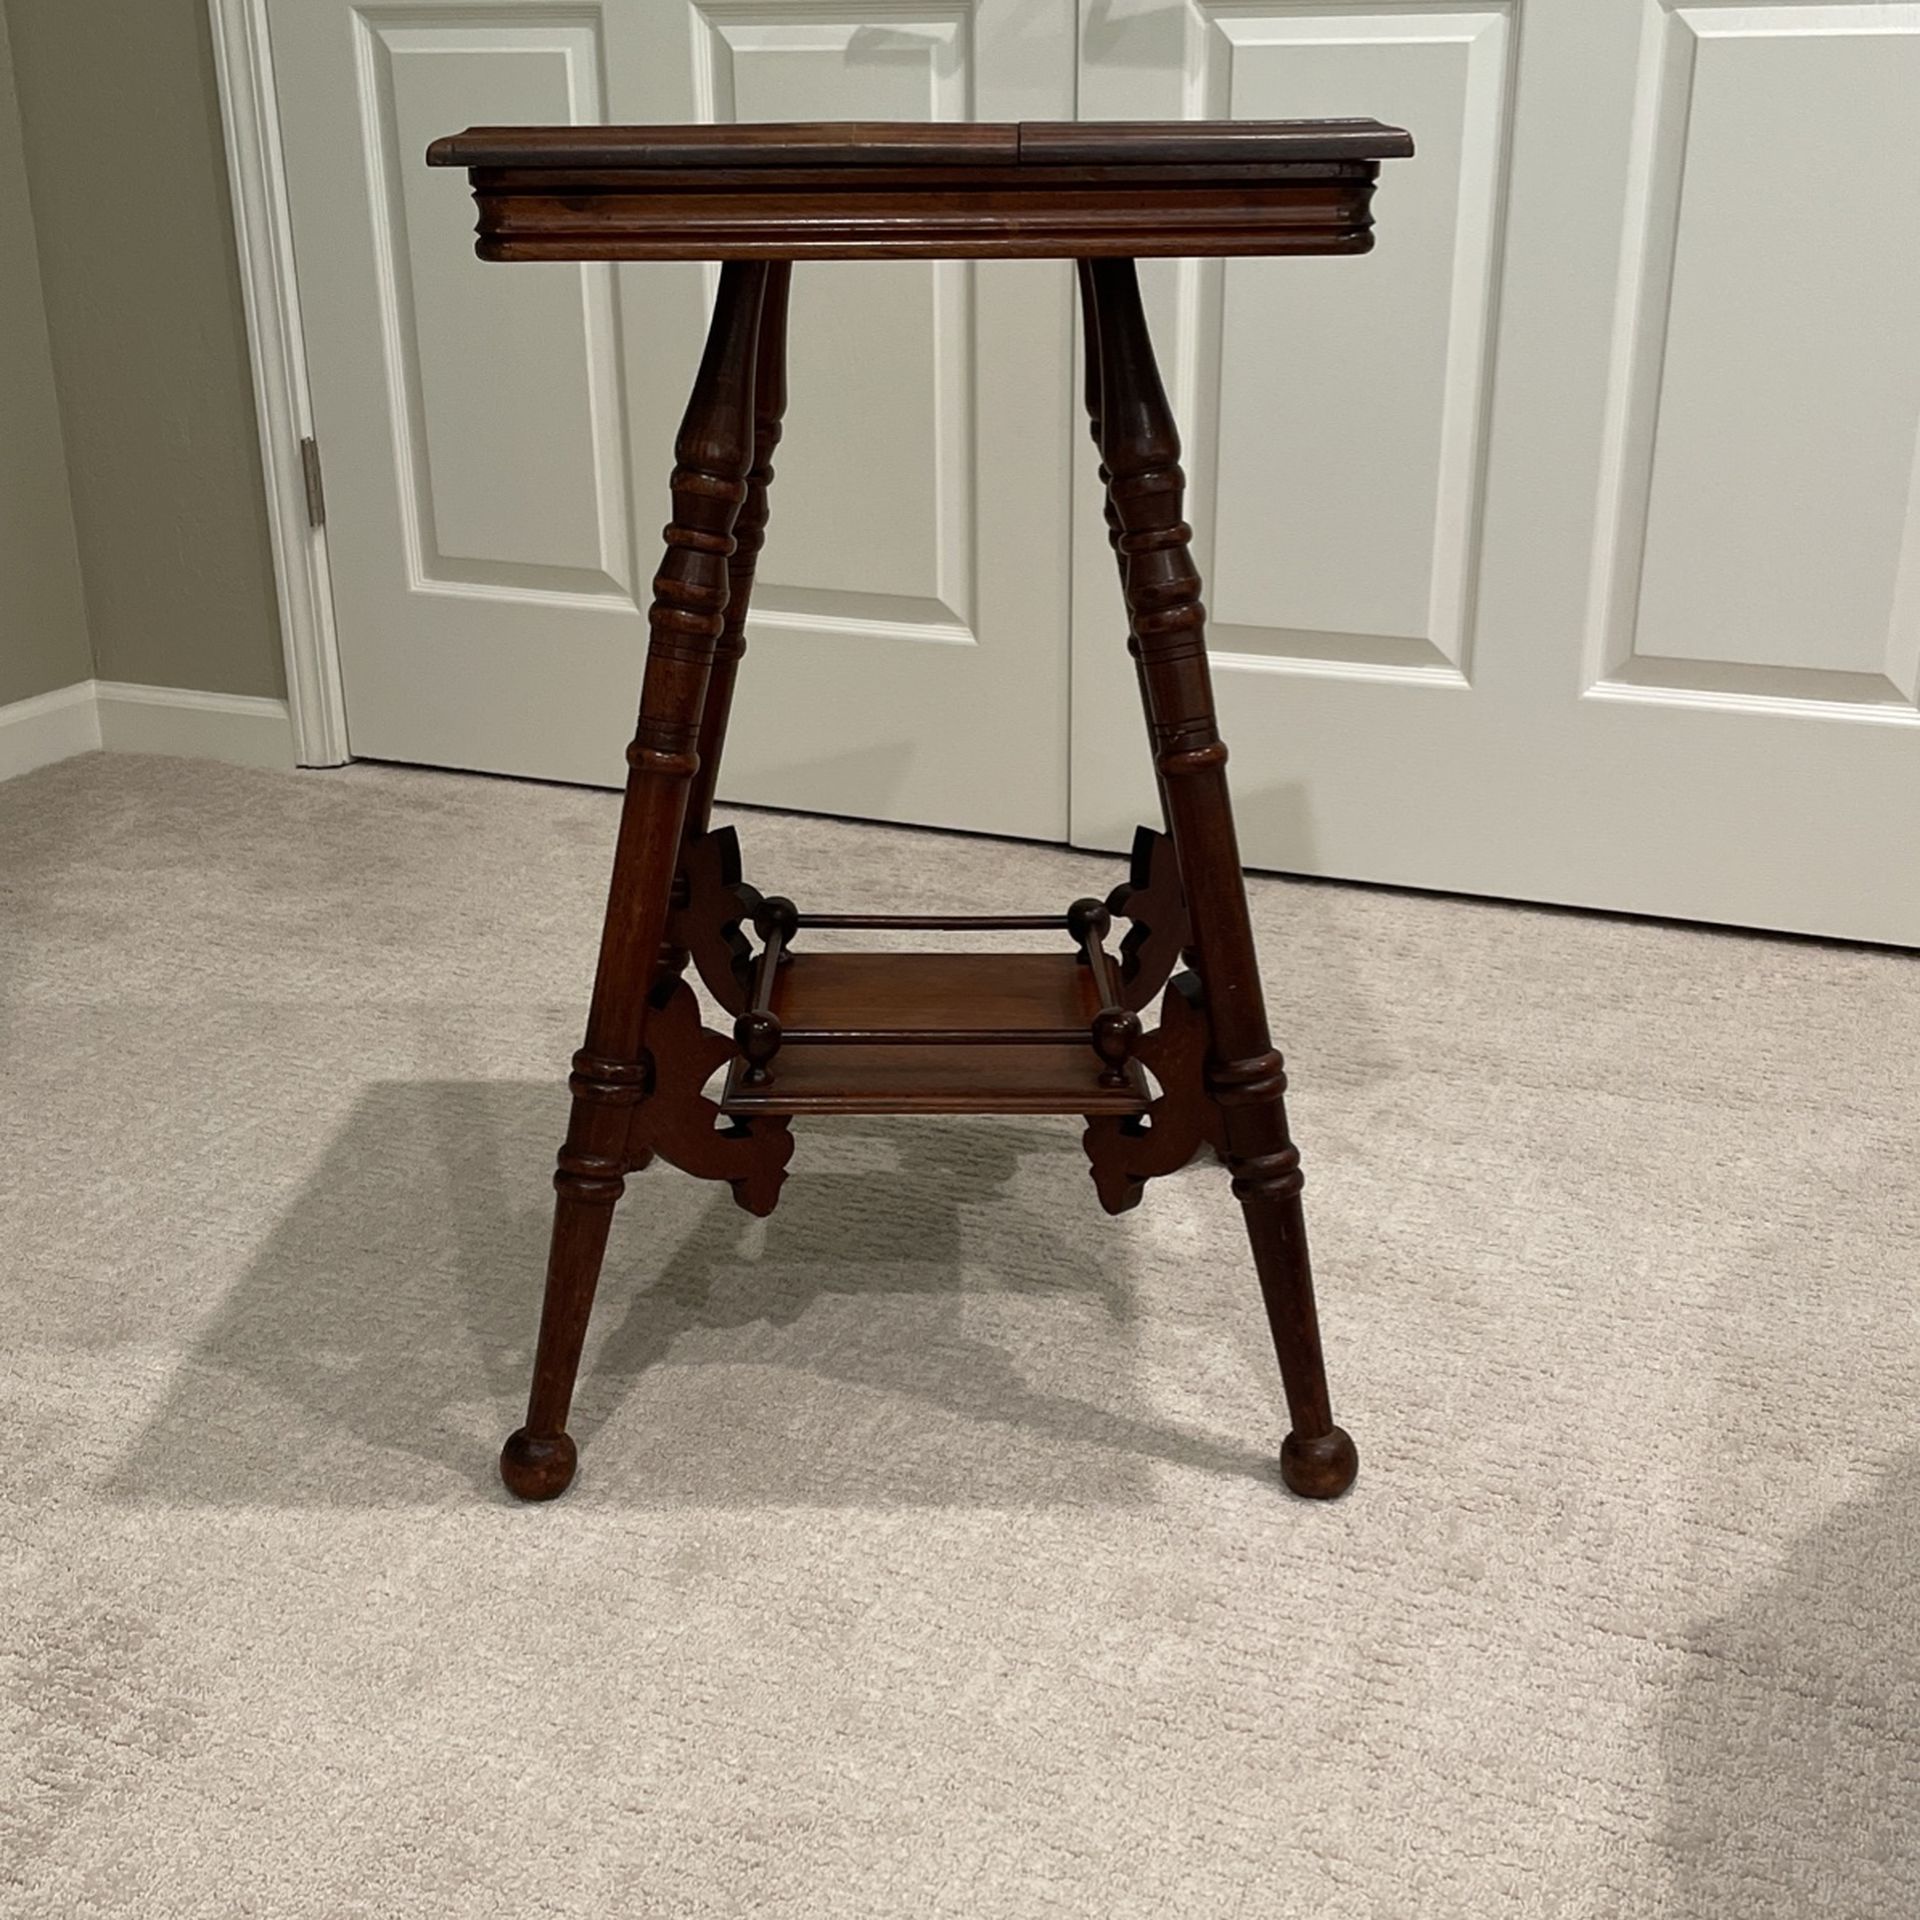 Antique Lamp Table (1870s)